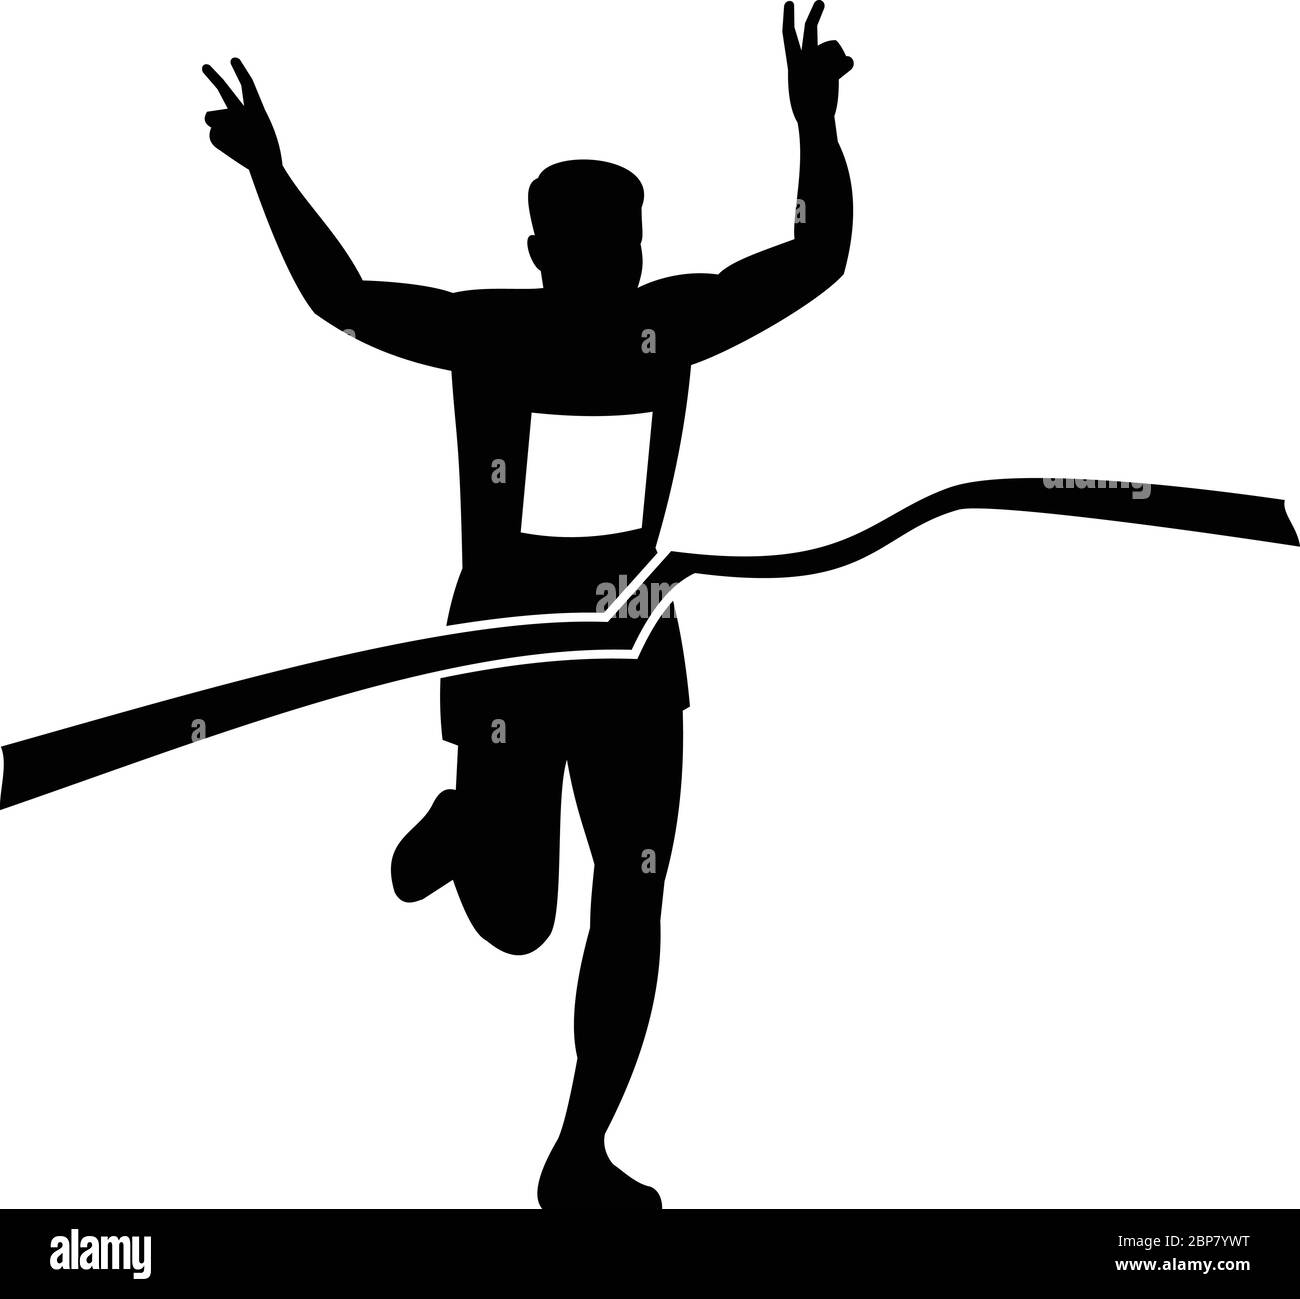 Retro style illustration of a silhouette of victorious marathon runner flashing victory hand sign while finishing at finish line ribbon tape in black Stock Vector